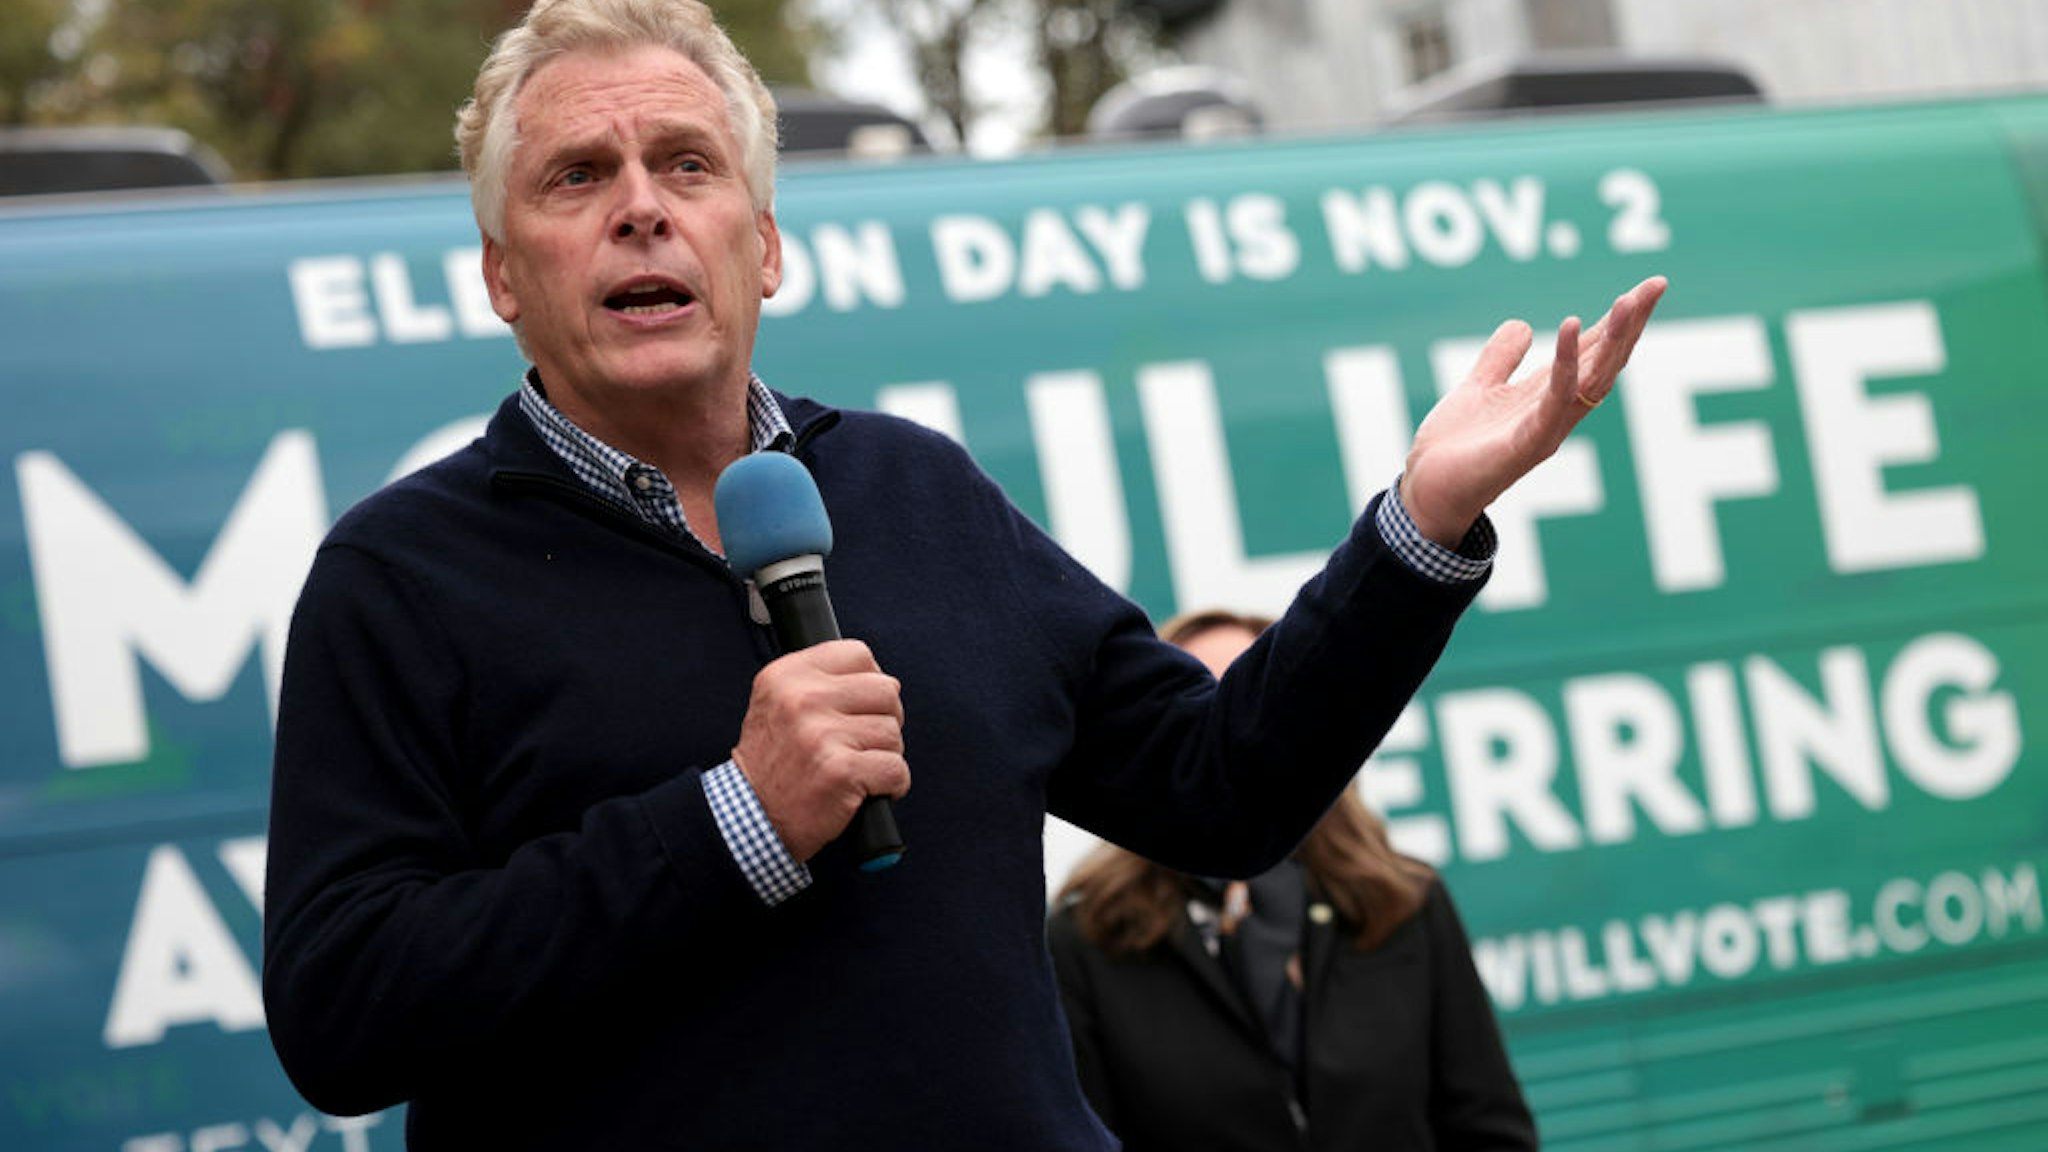 erry McAuliffe Continues Campaign For Governor Of Virginia